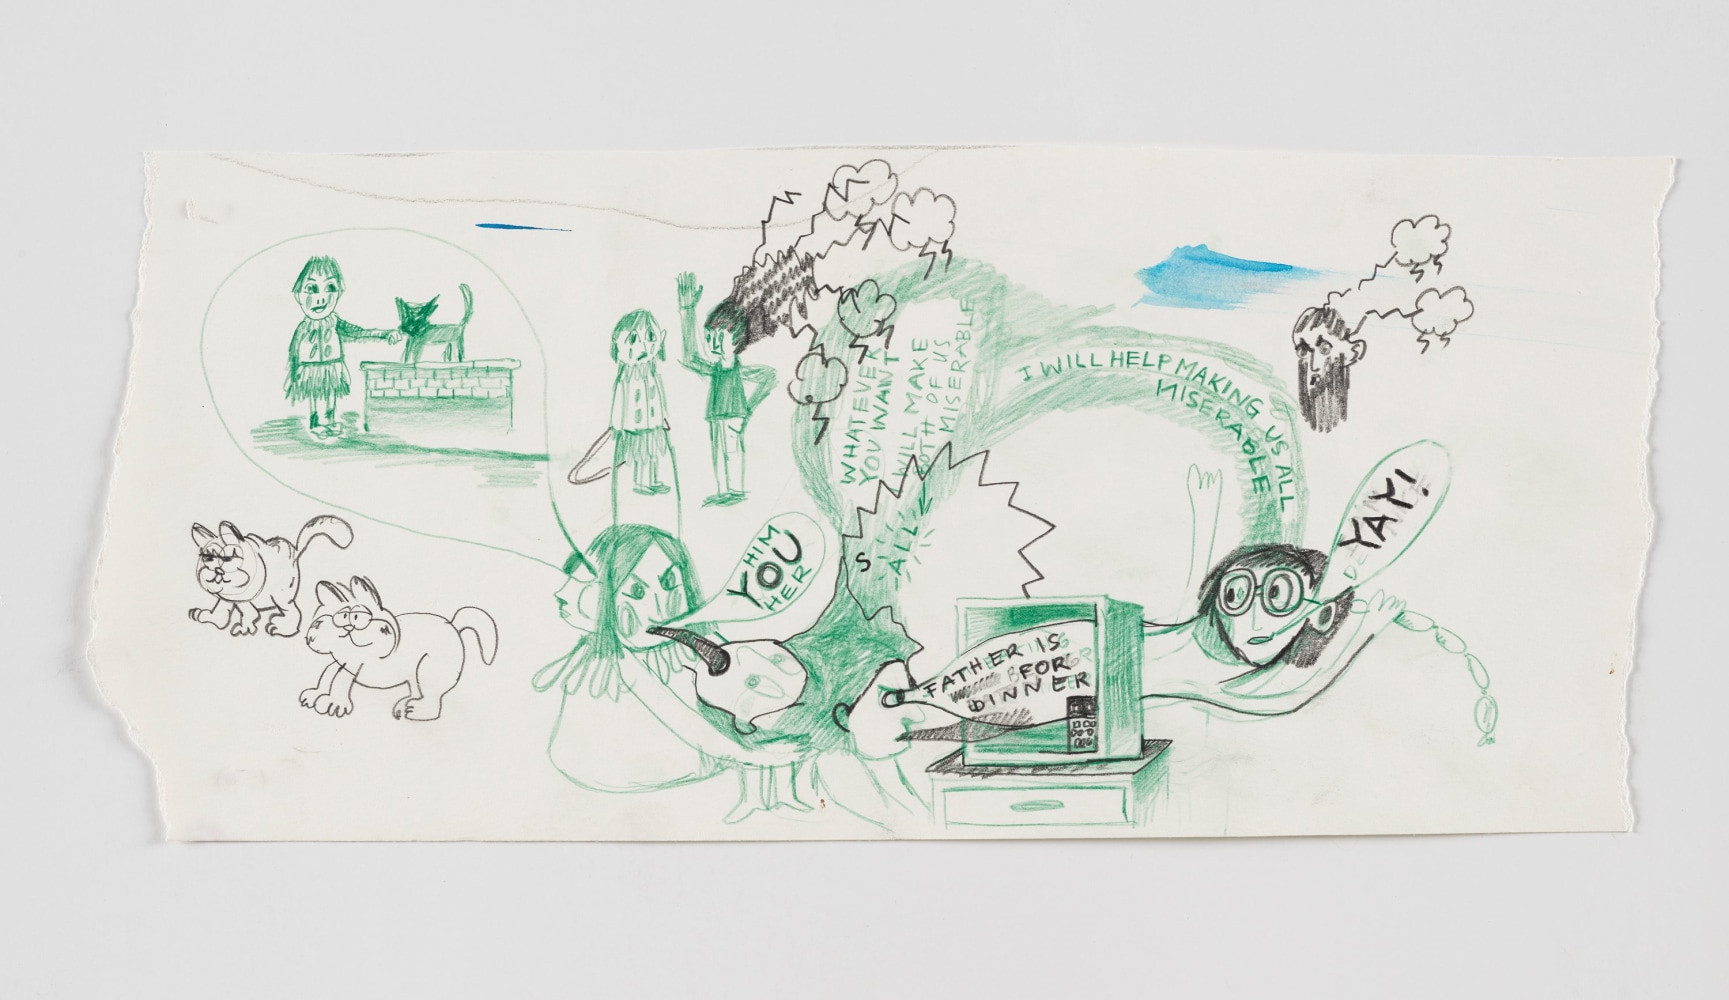 Christina Forrer
You, Yay, Misery!, 2022
Pencil on paper
8 x 18 1/4 inches
(20.3 x 46.4 cm)